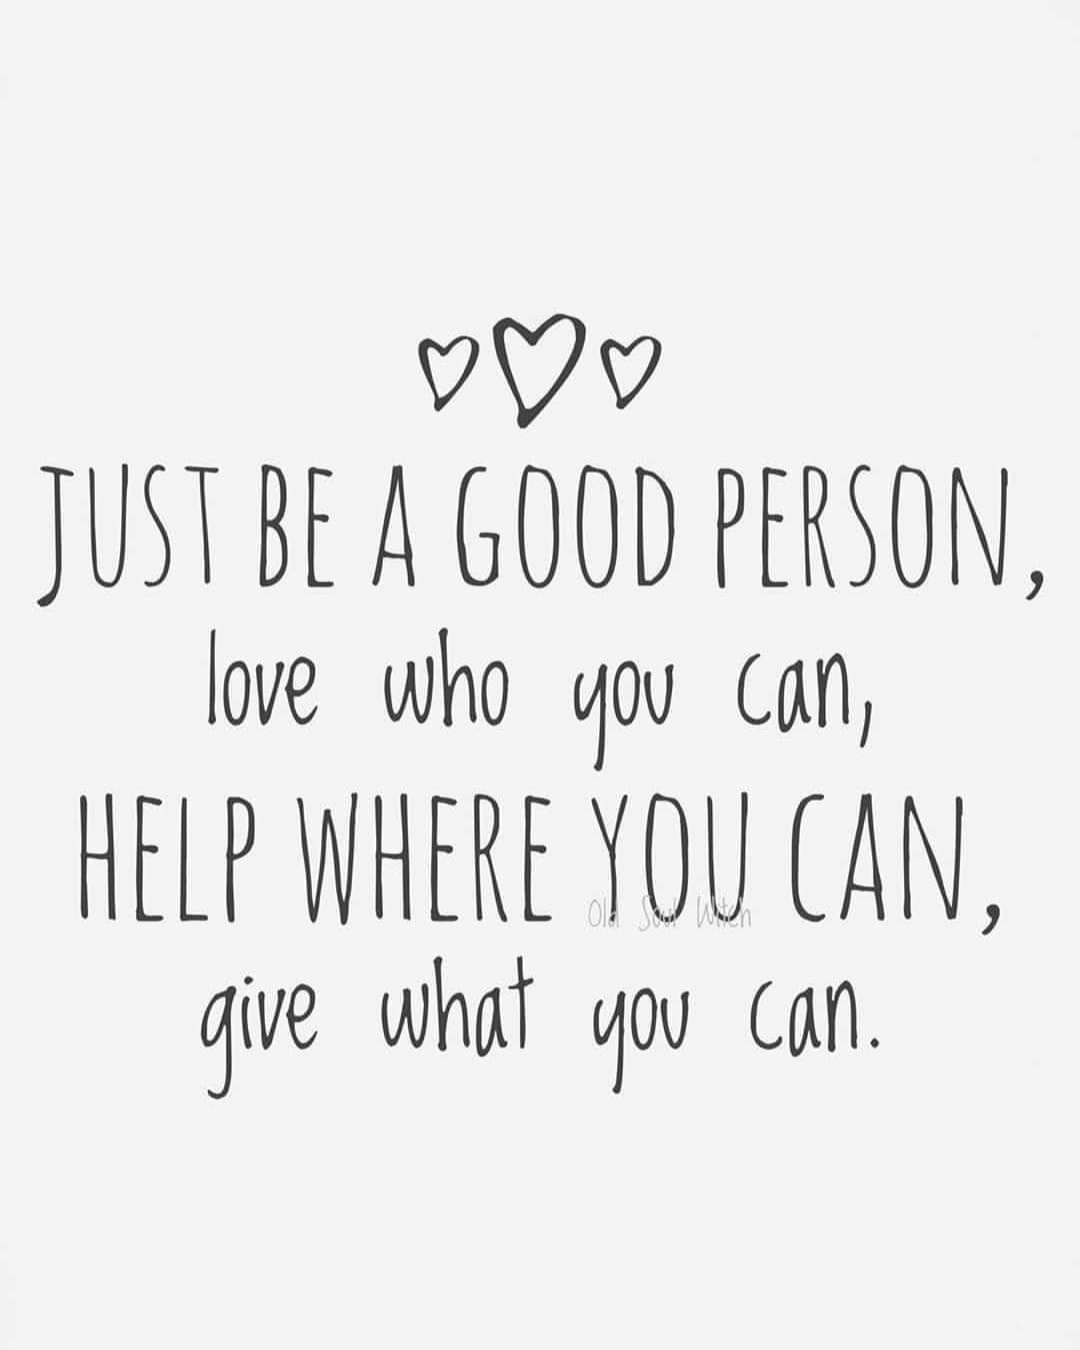 Just be a good person, love who you can, help where you can, give what you can.